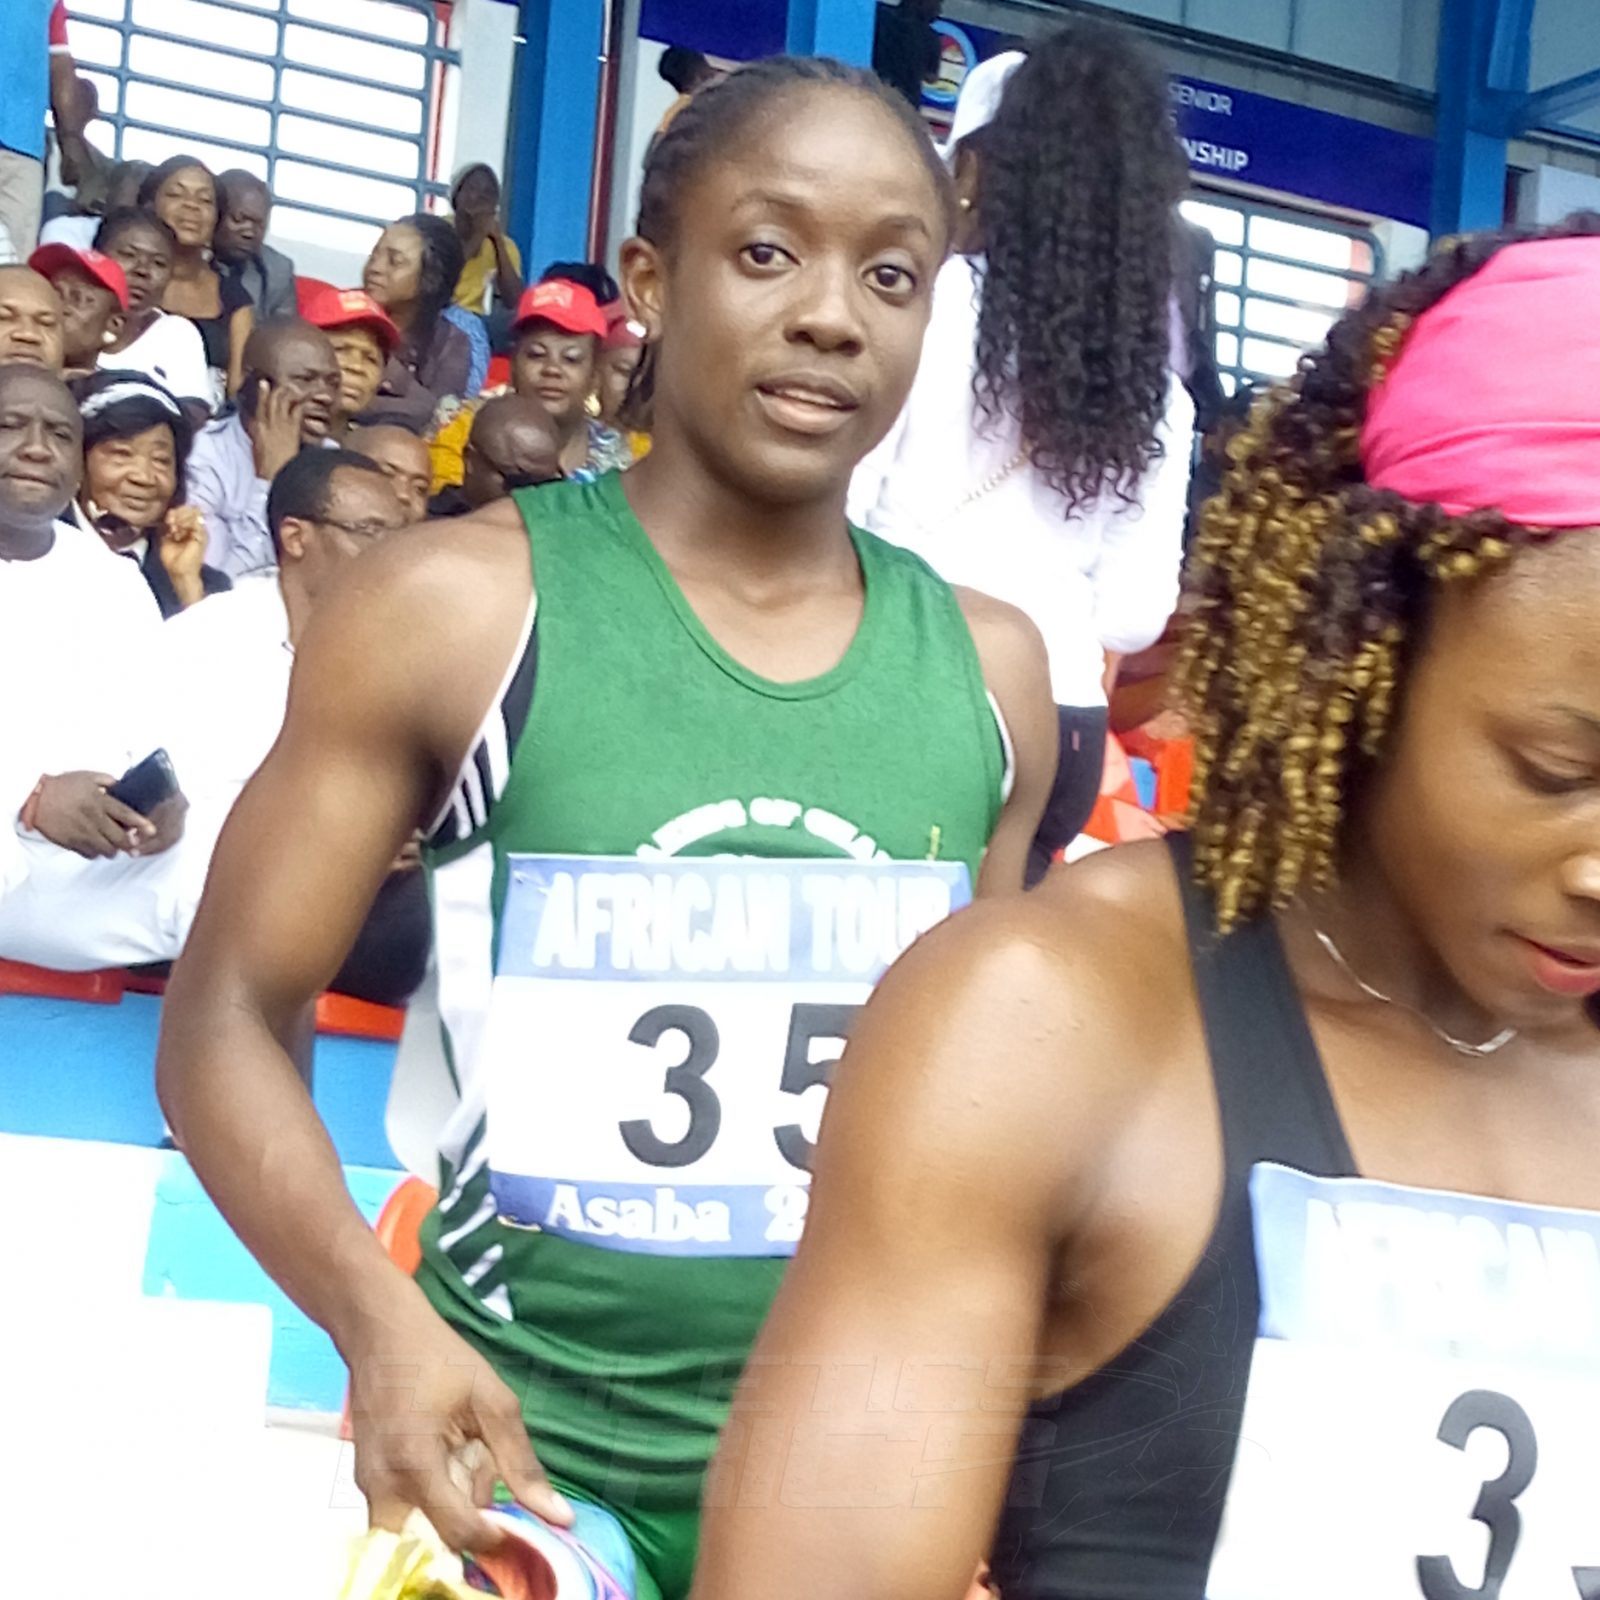 MoC's Joy Udo Gabriel after she won the women's 100m in a PB of 11.40 secs. / Photo credit: Naomi Peters for Athletics Africa